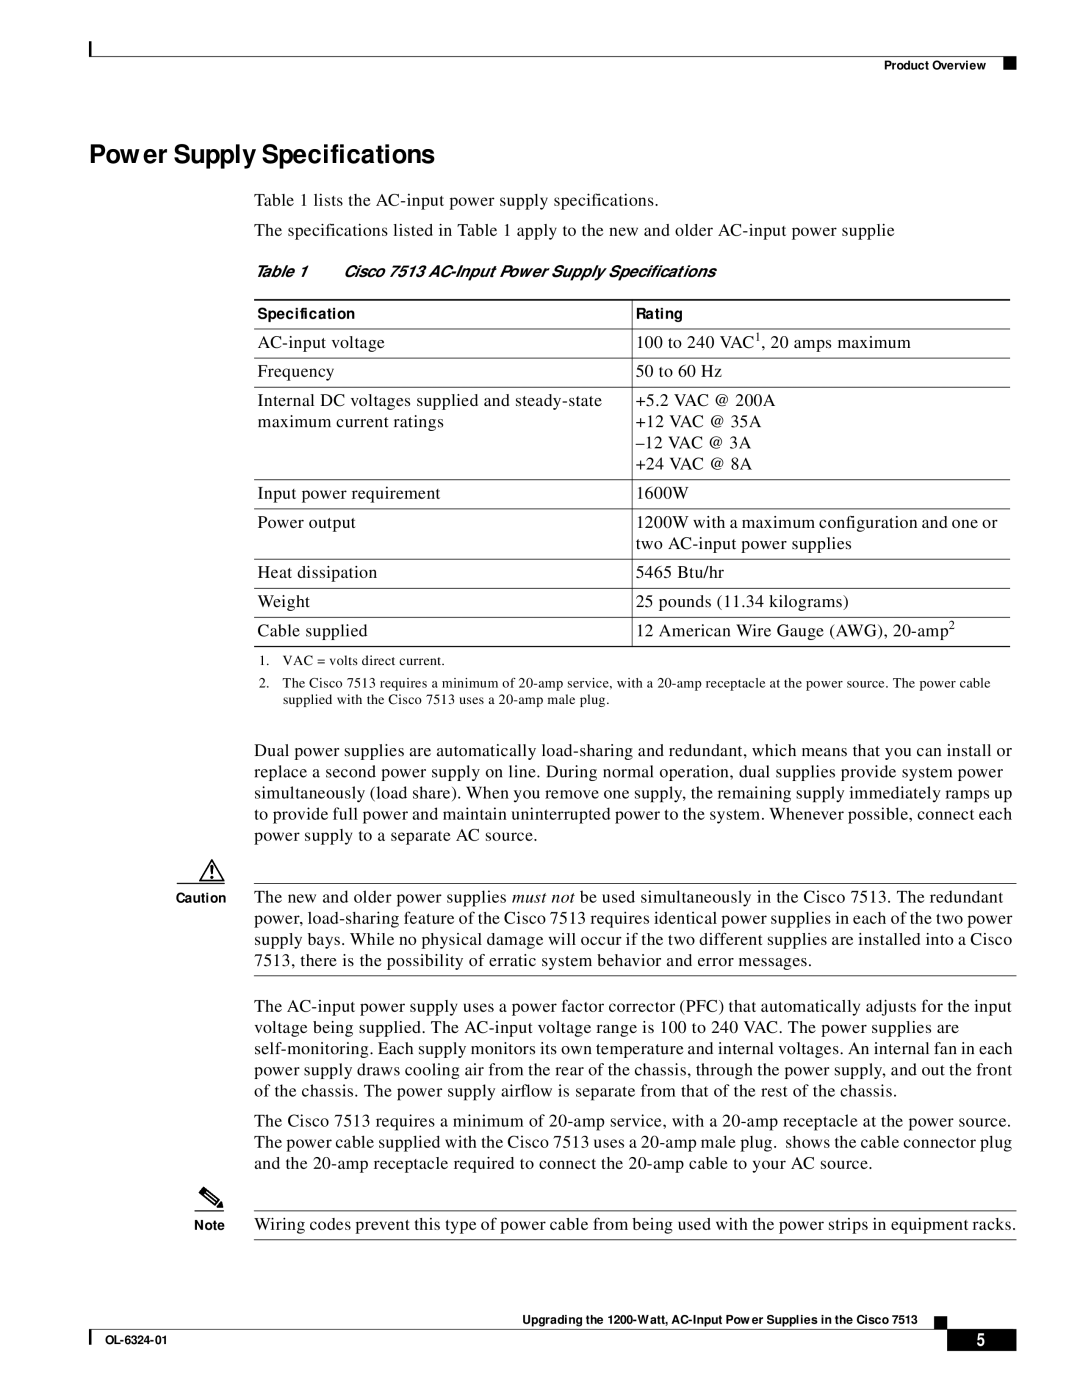 Cisco Systems 7513 manual Power Supply Specifications, Rating 